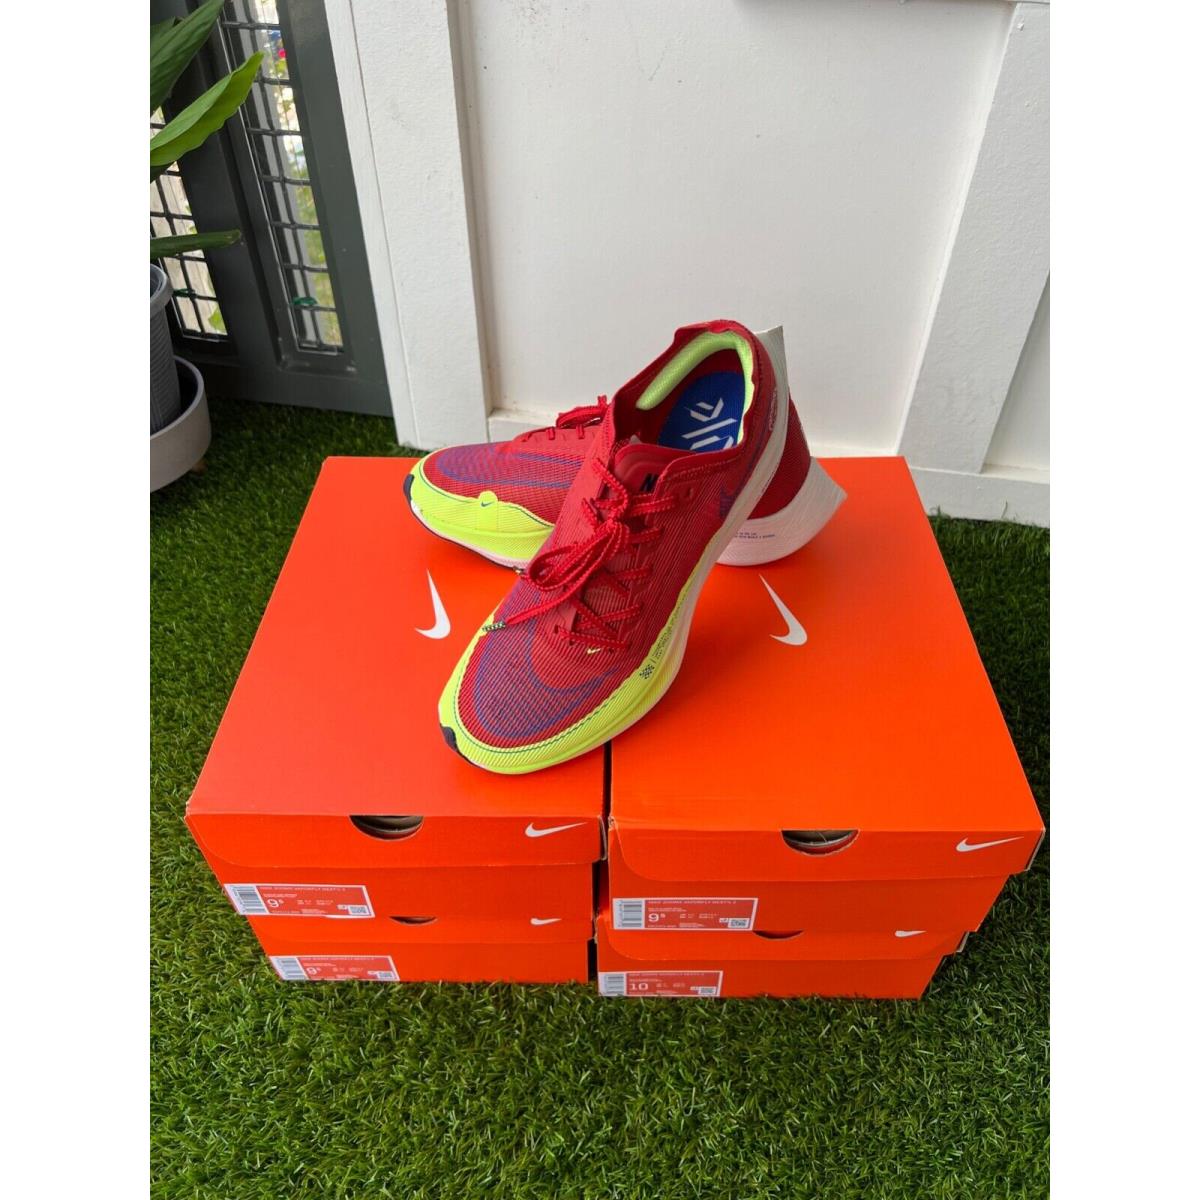 Nike shoes ZoomX Vaporfly Next - Multicolor 7